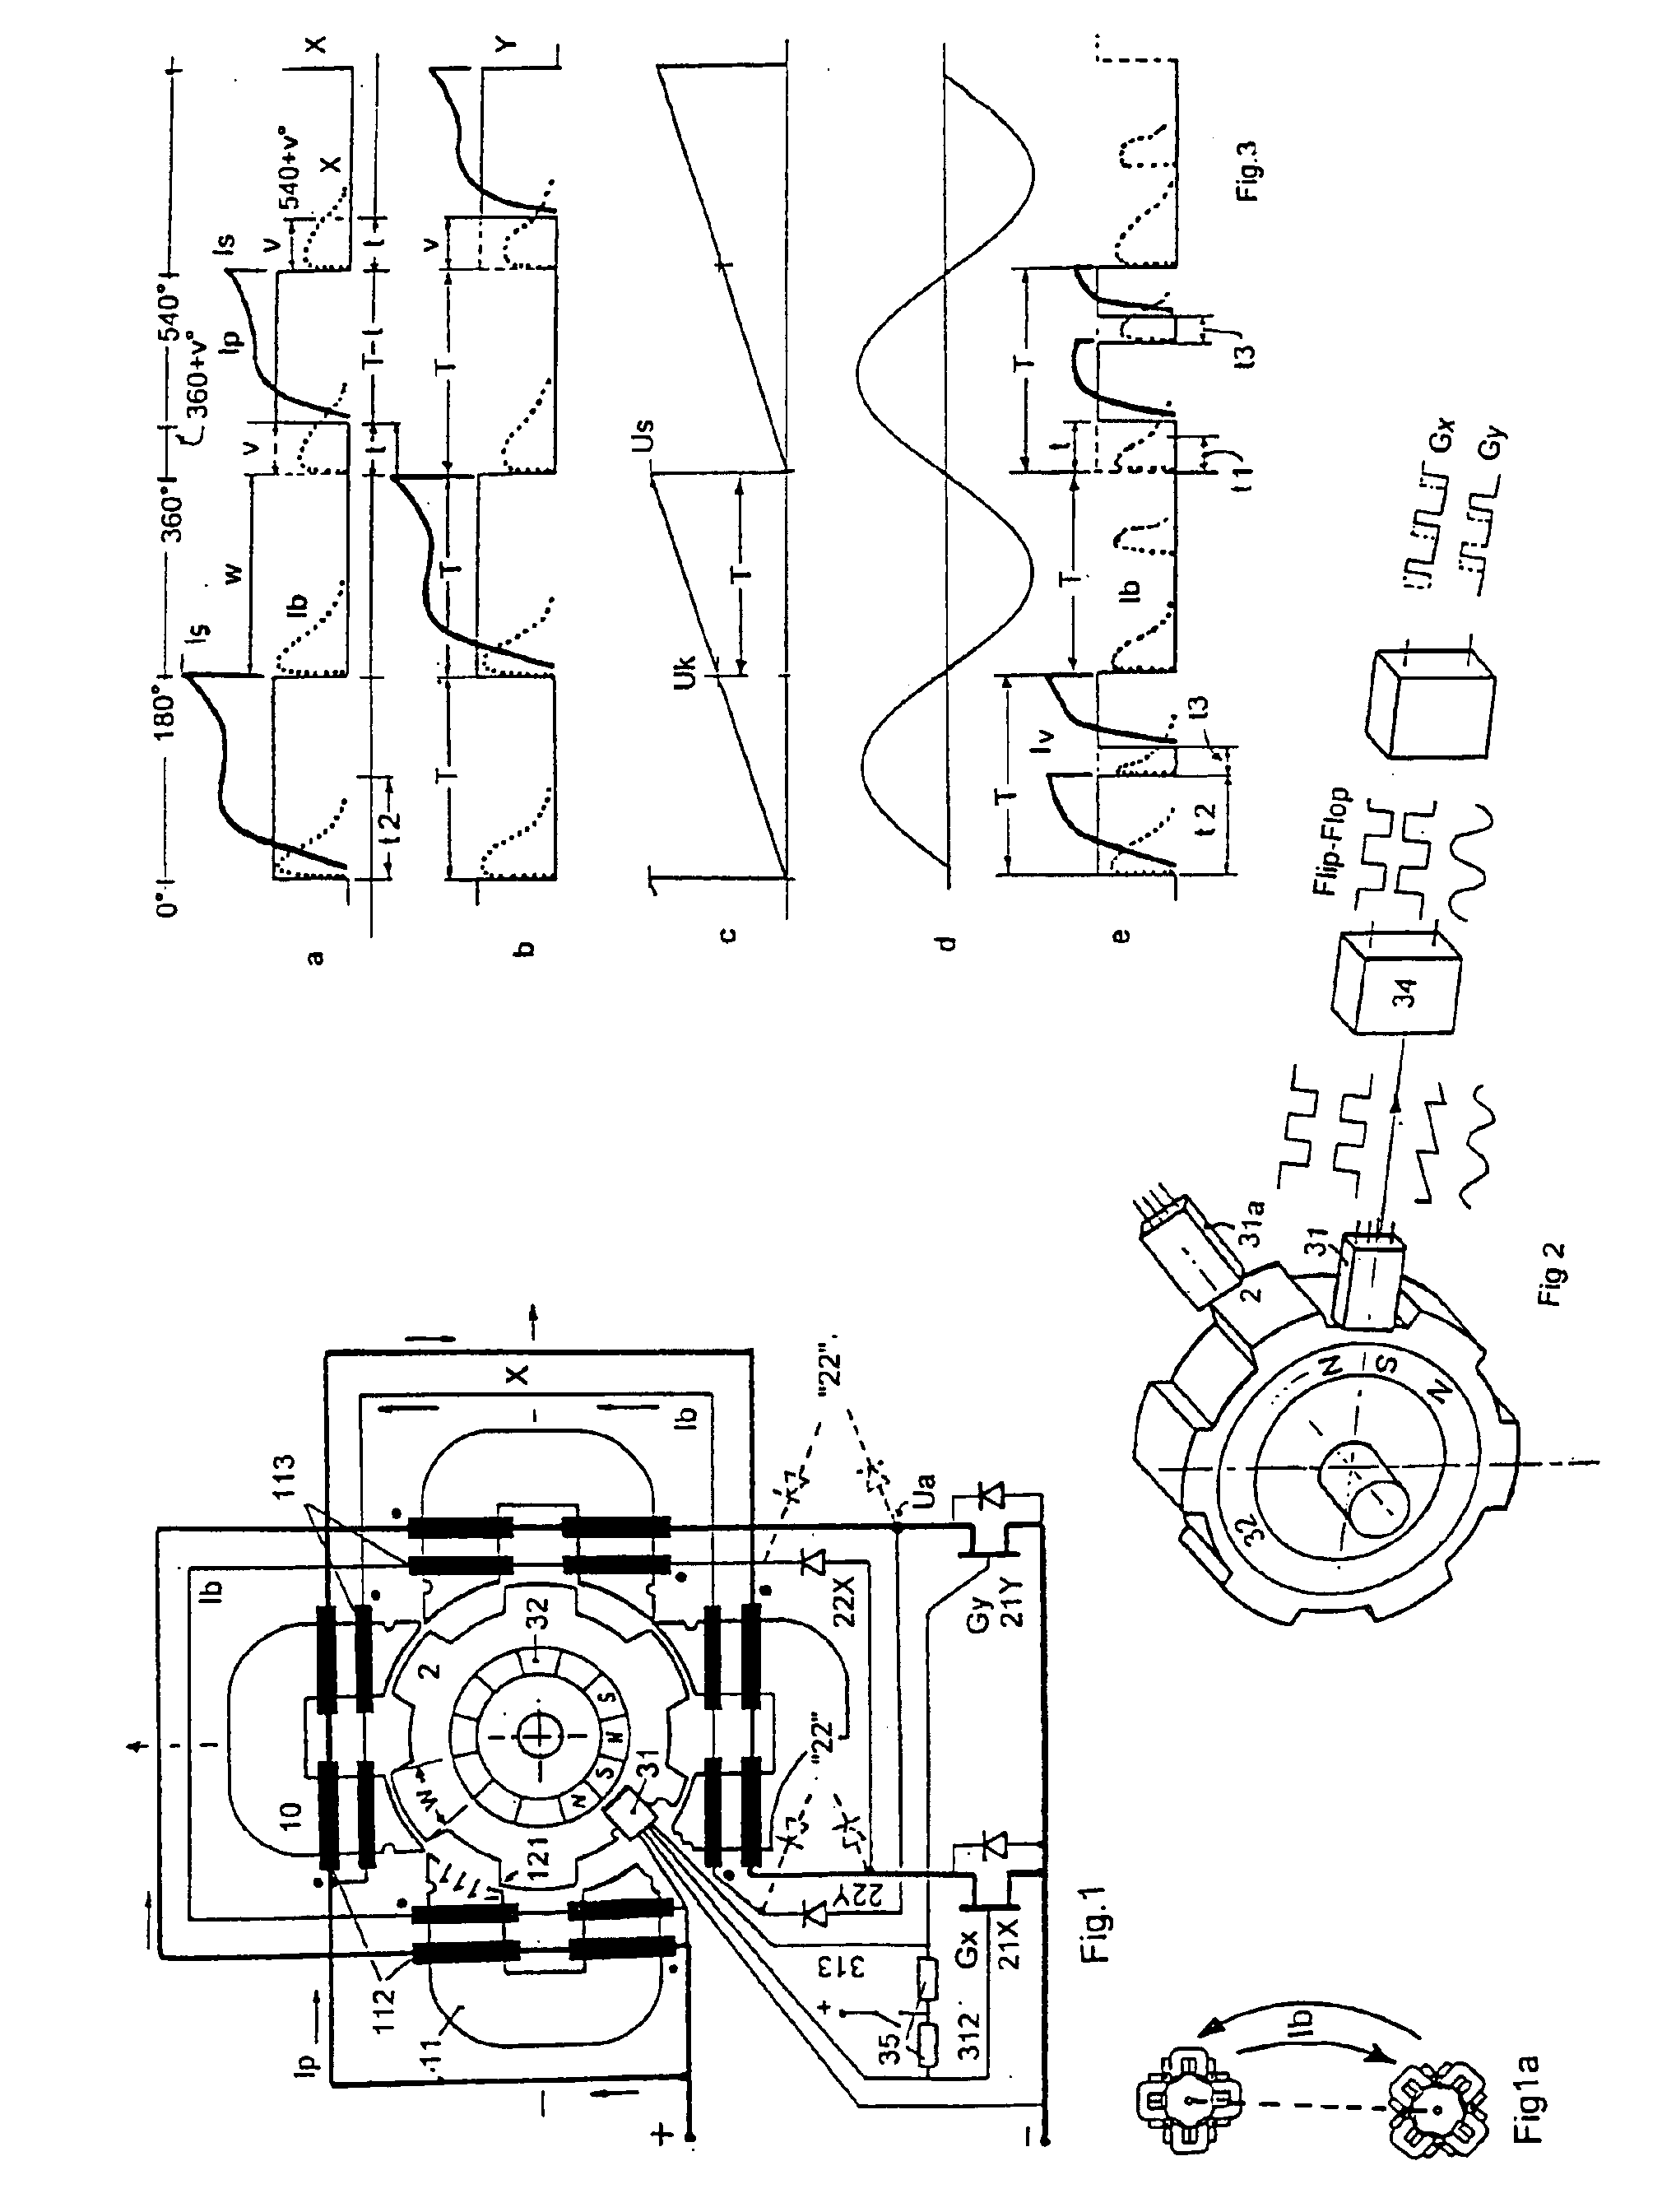 Method and circuits for controlling the power of an electronically switched, two-phase reluctance machine